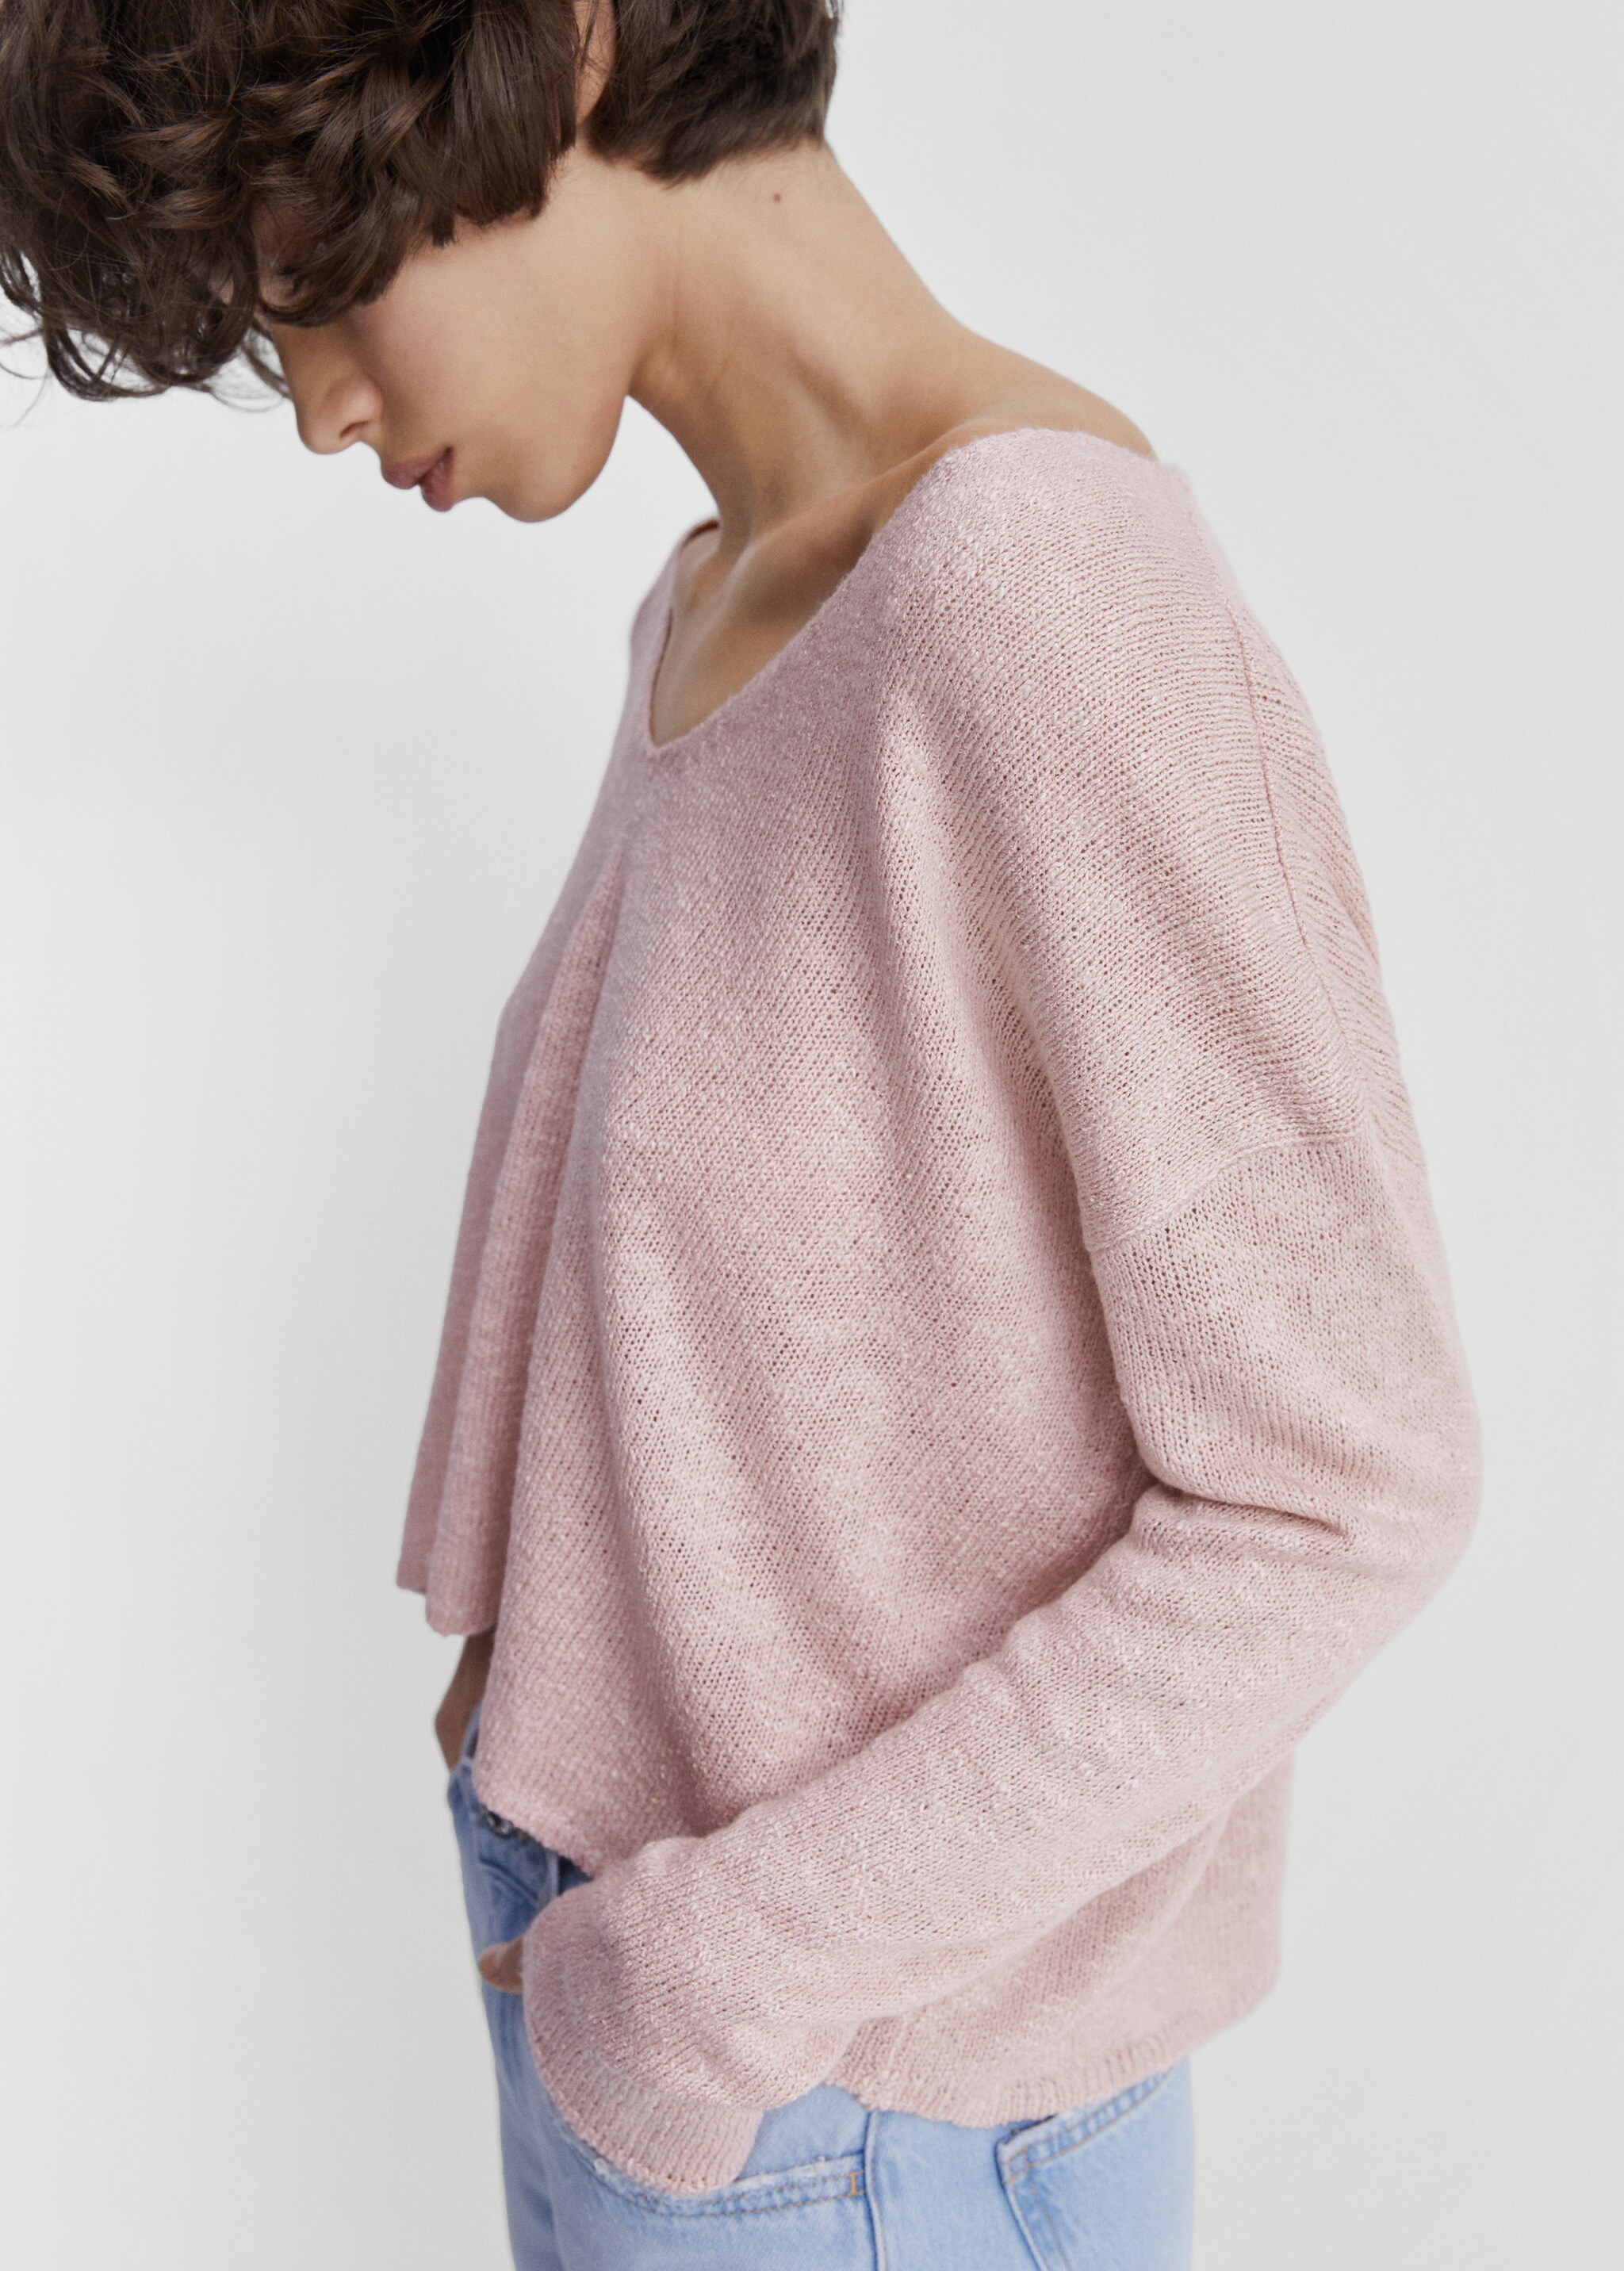 Low-cut neck sweater - Details of the article 1